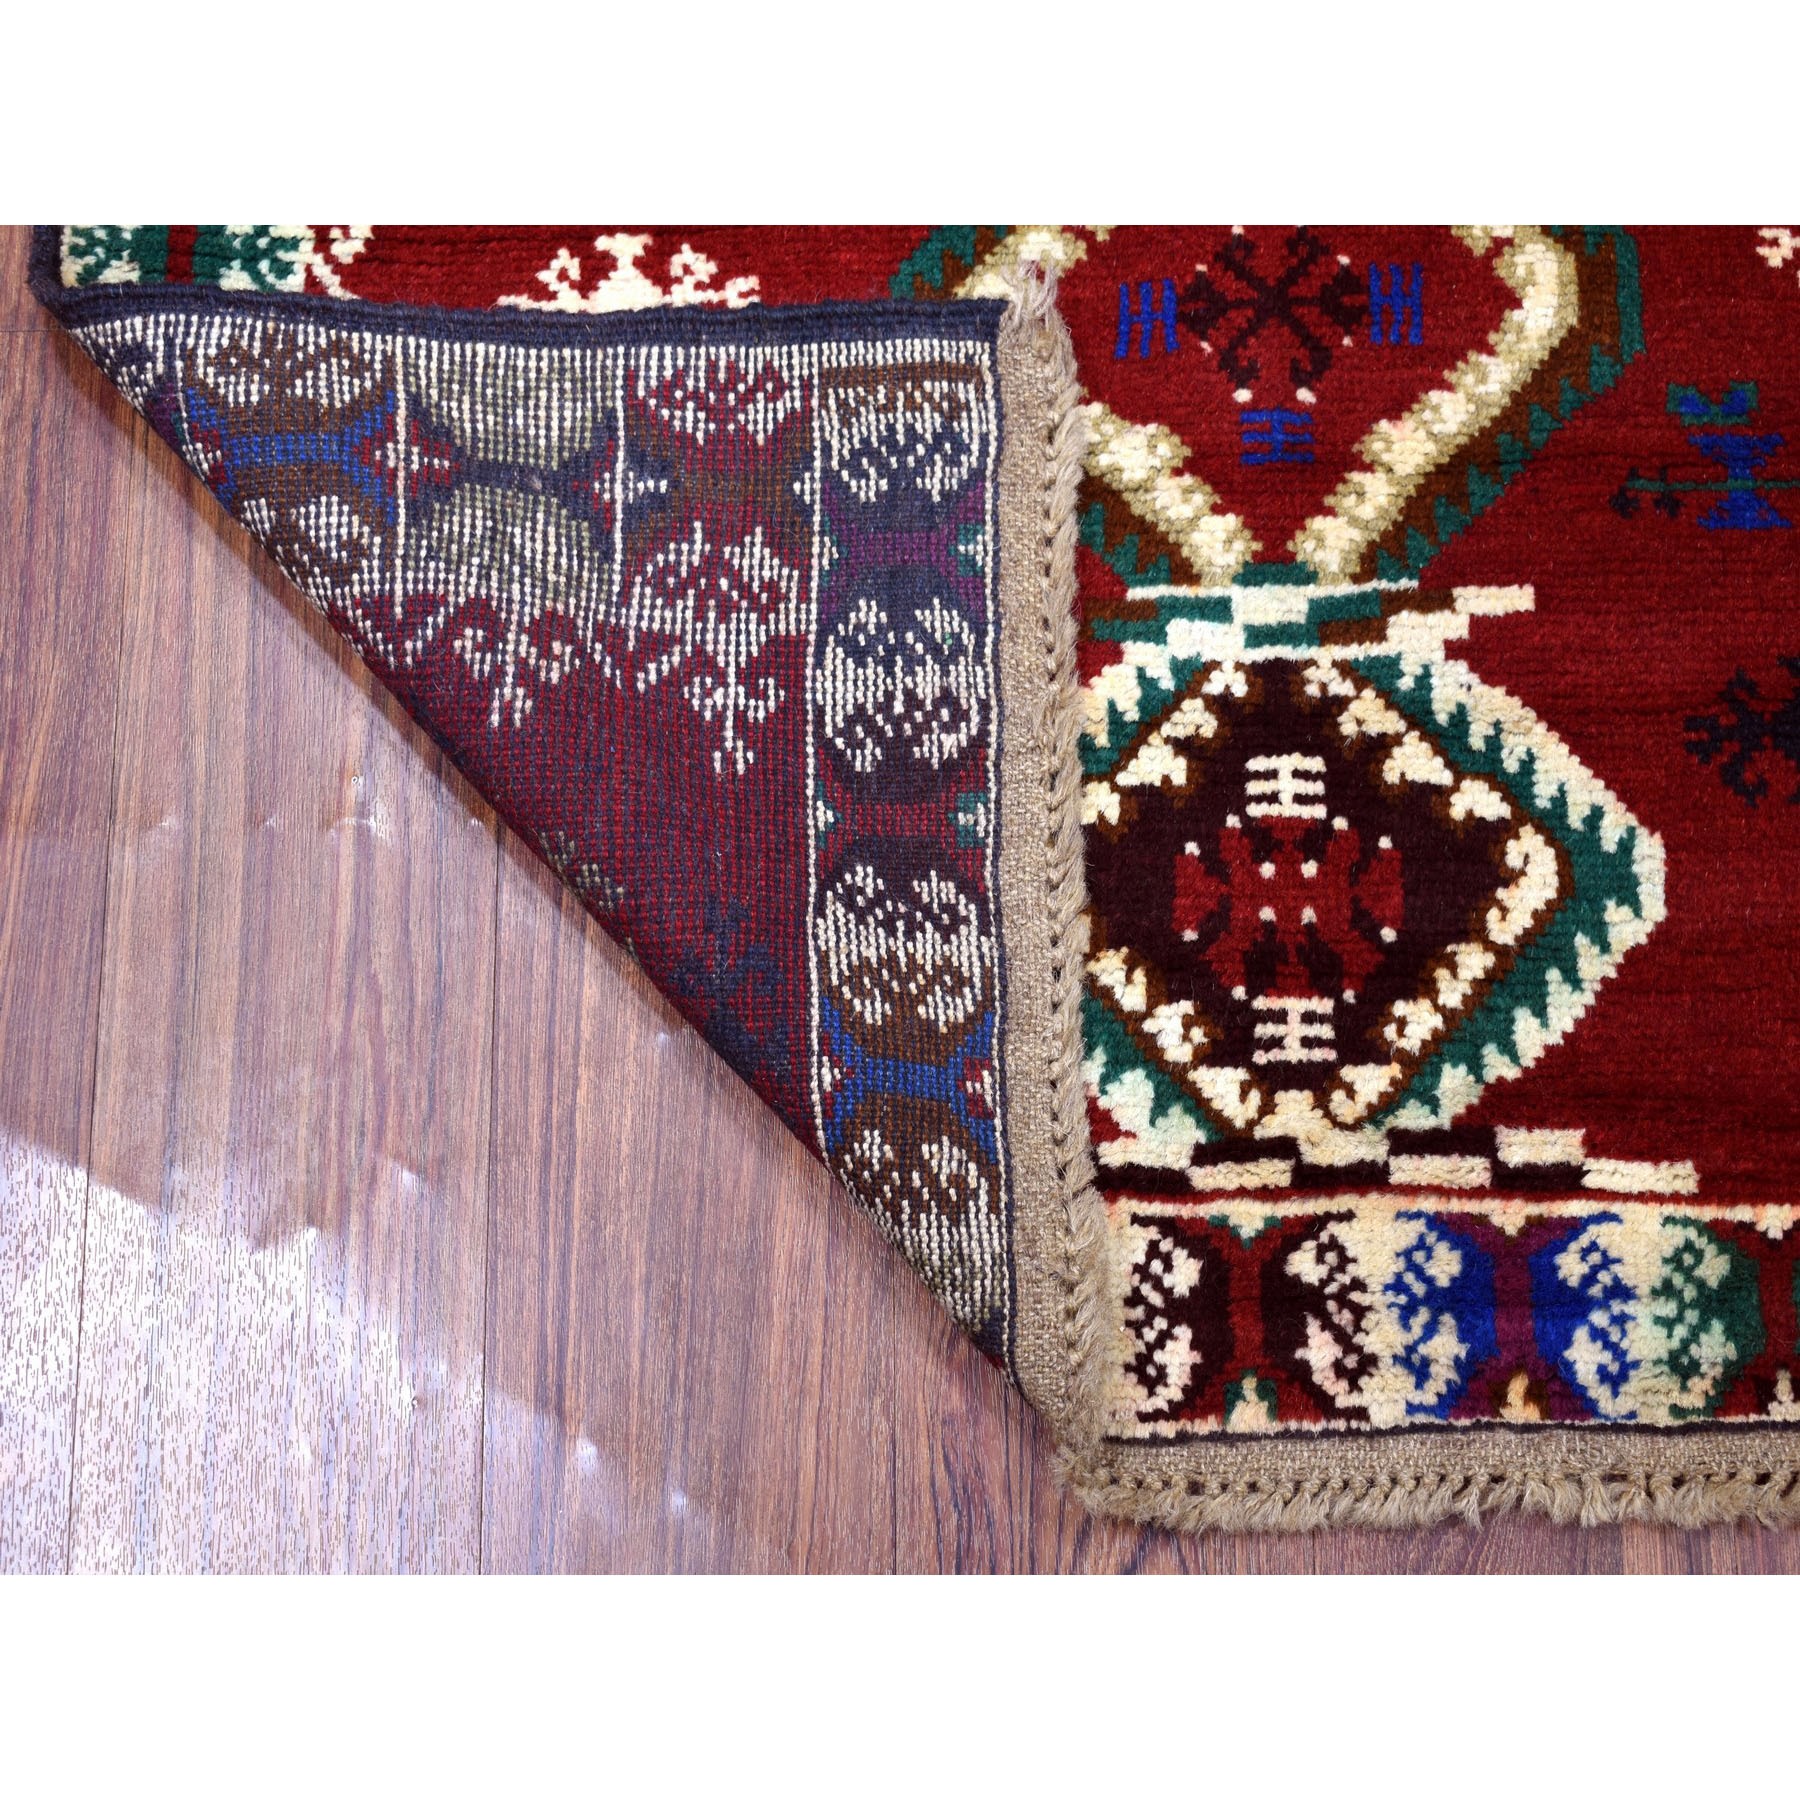 3'3"x4'9" Red Colorful Afghan Baluch Geometric Design Hand Woven Pure Wool Oriental Rug 